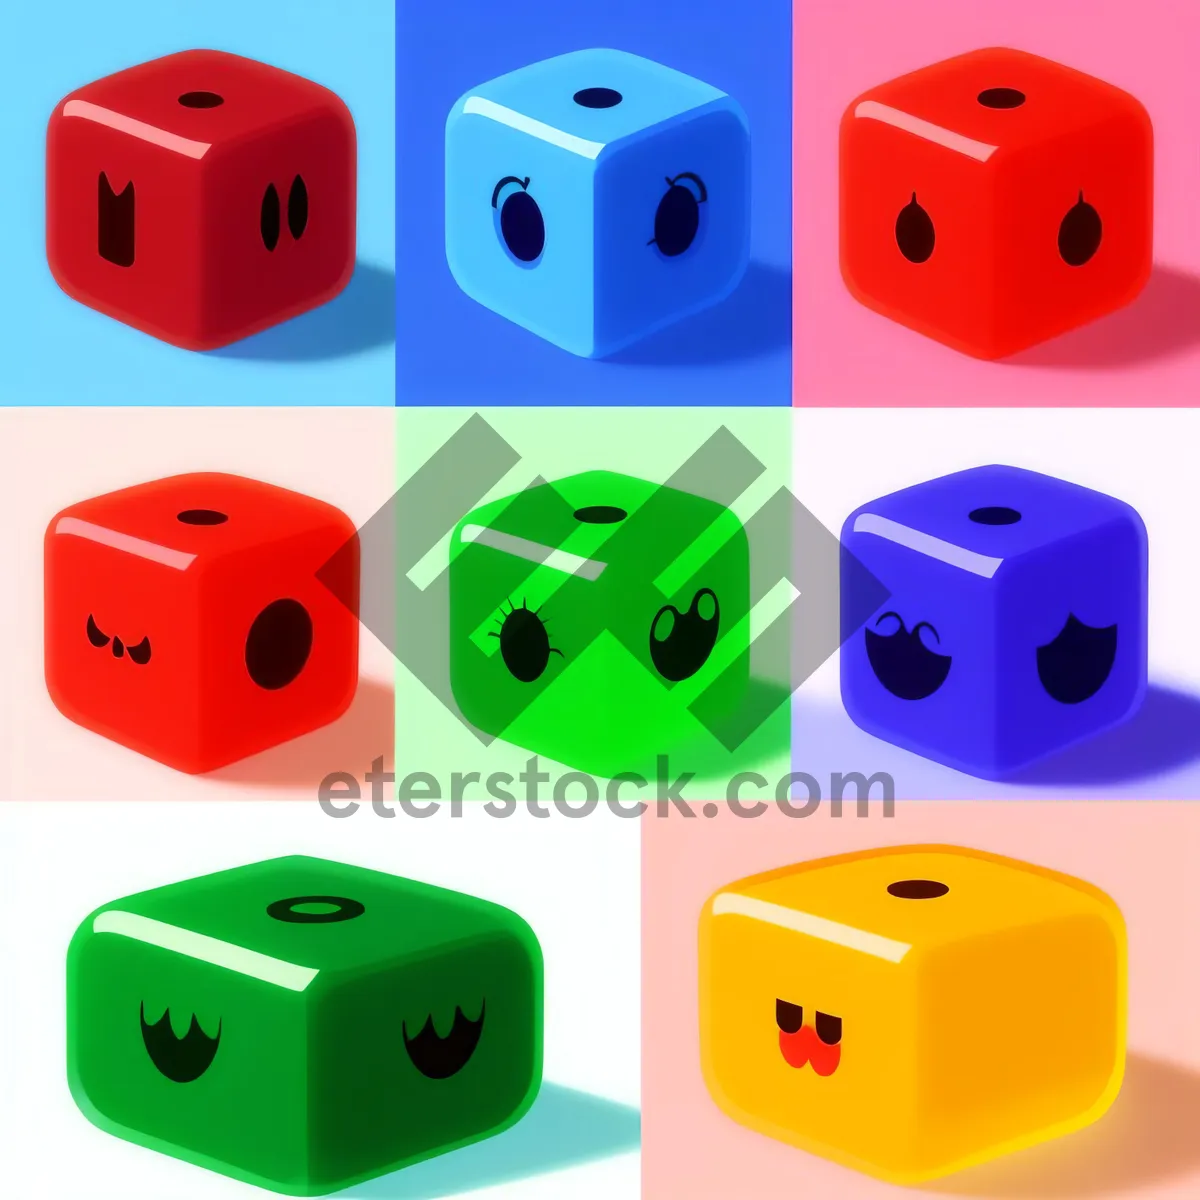 Picture of Web Icons Set: Resort Area Buttons - Glossy Square Design